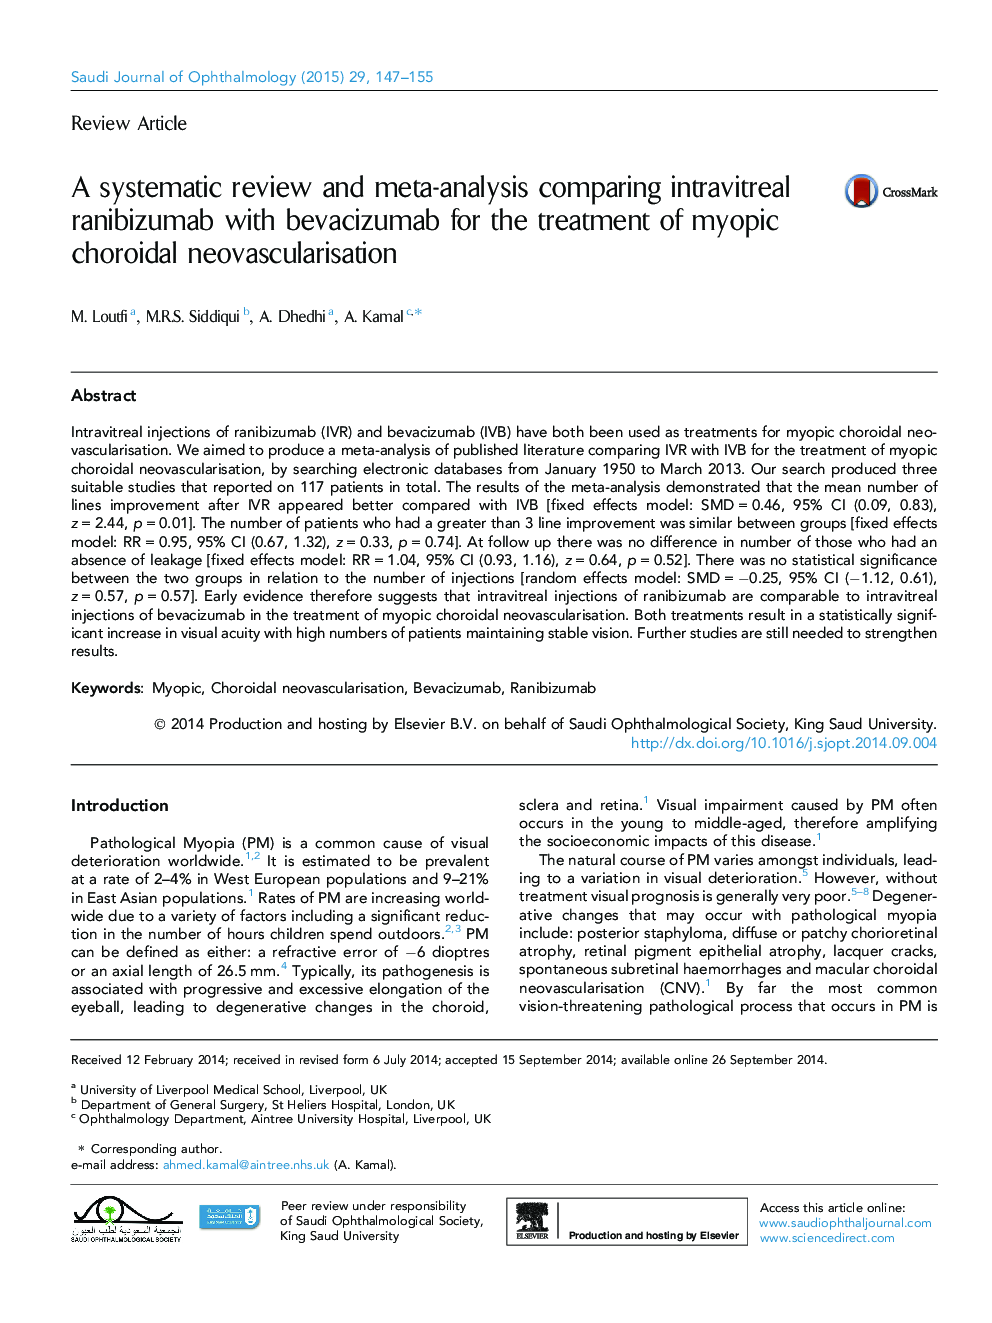 A systematic review and meta-analysis comparing intravitreal ranibizumab with bevacizumab for the treatment of myopic choroidal neovascularisation 